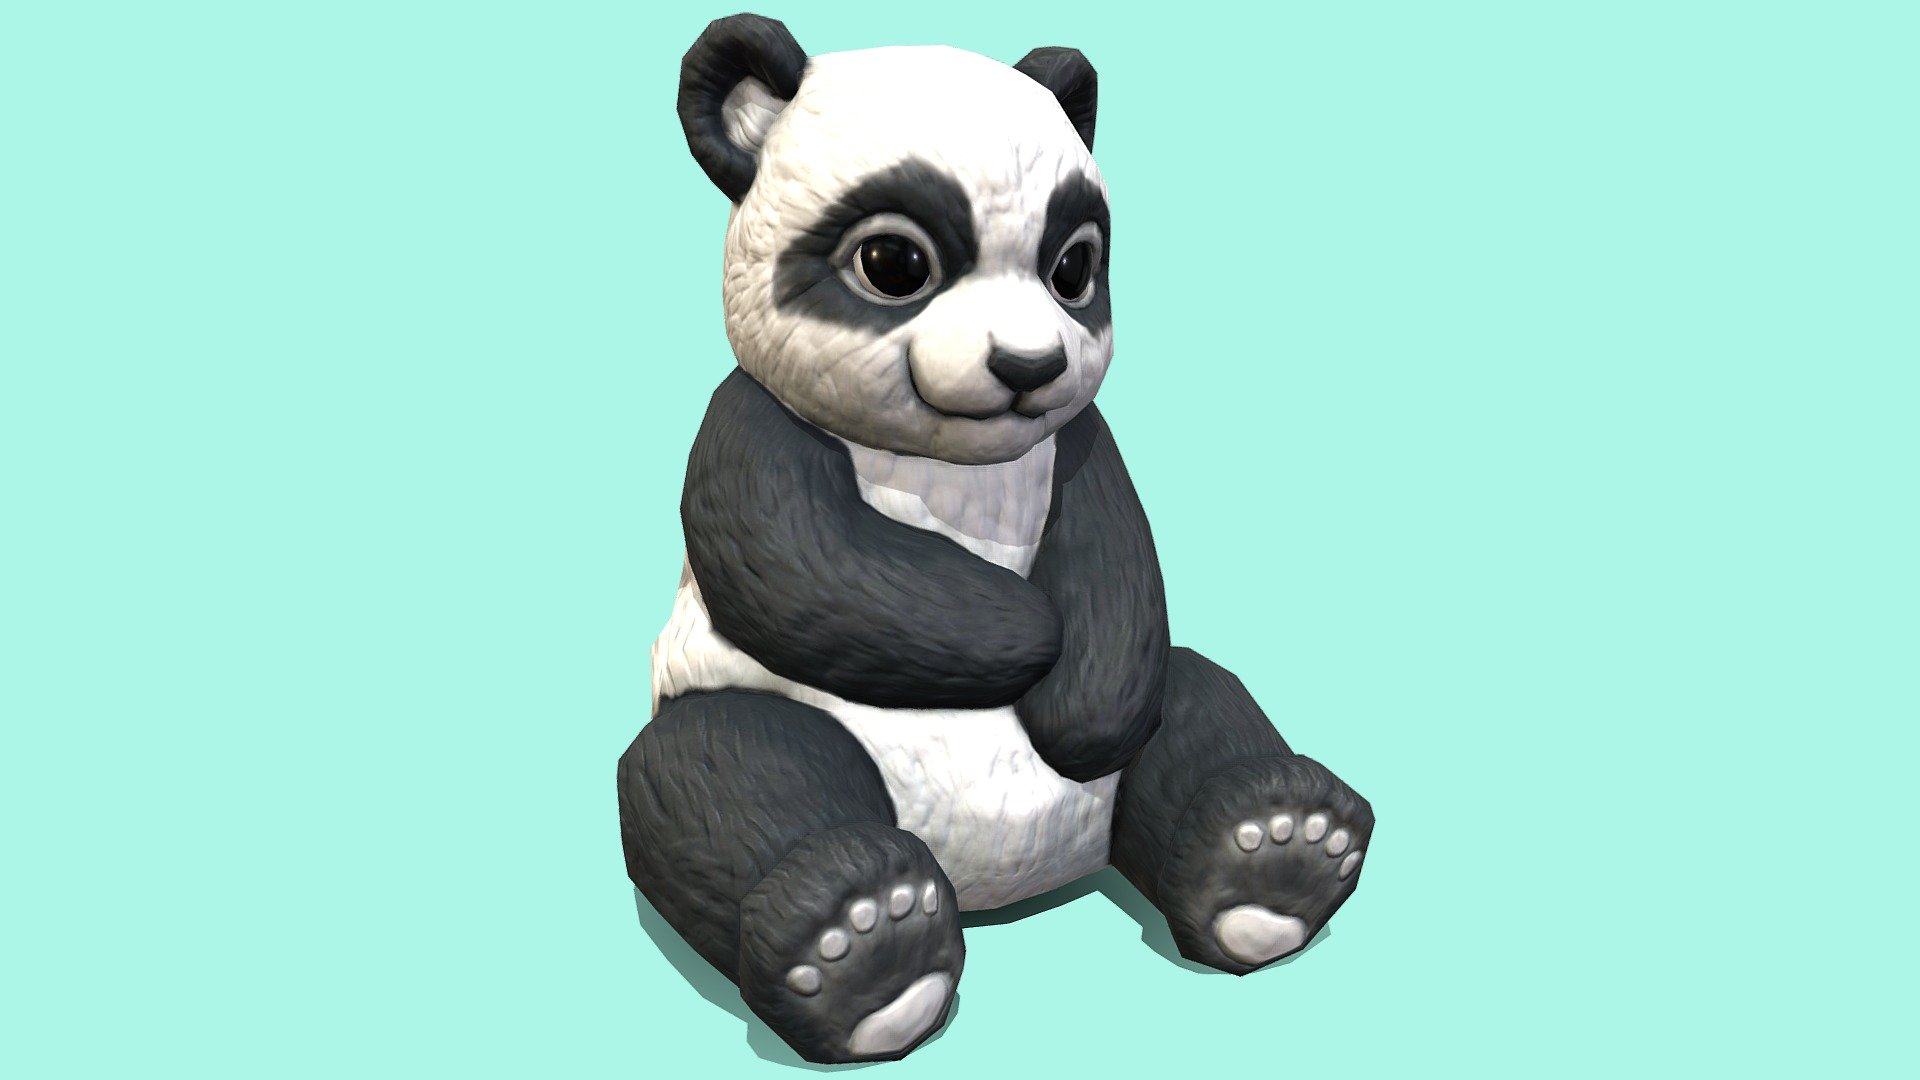 Cute Panda Bear cub for a still scene, as a plushie for a child or as a statue in a game.

Not rigged, not animated!

Highpoly sculpted in Nomadsculpt, Lowpoly made in Blender. Highpoly and Lowpoly-models are in Blend-file included in additional file with embedded materials. Model and Concept by Me, Enya Gerber.

If you need additional work done do not hesitate to contact me, I am currently available for freelance work 3d model